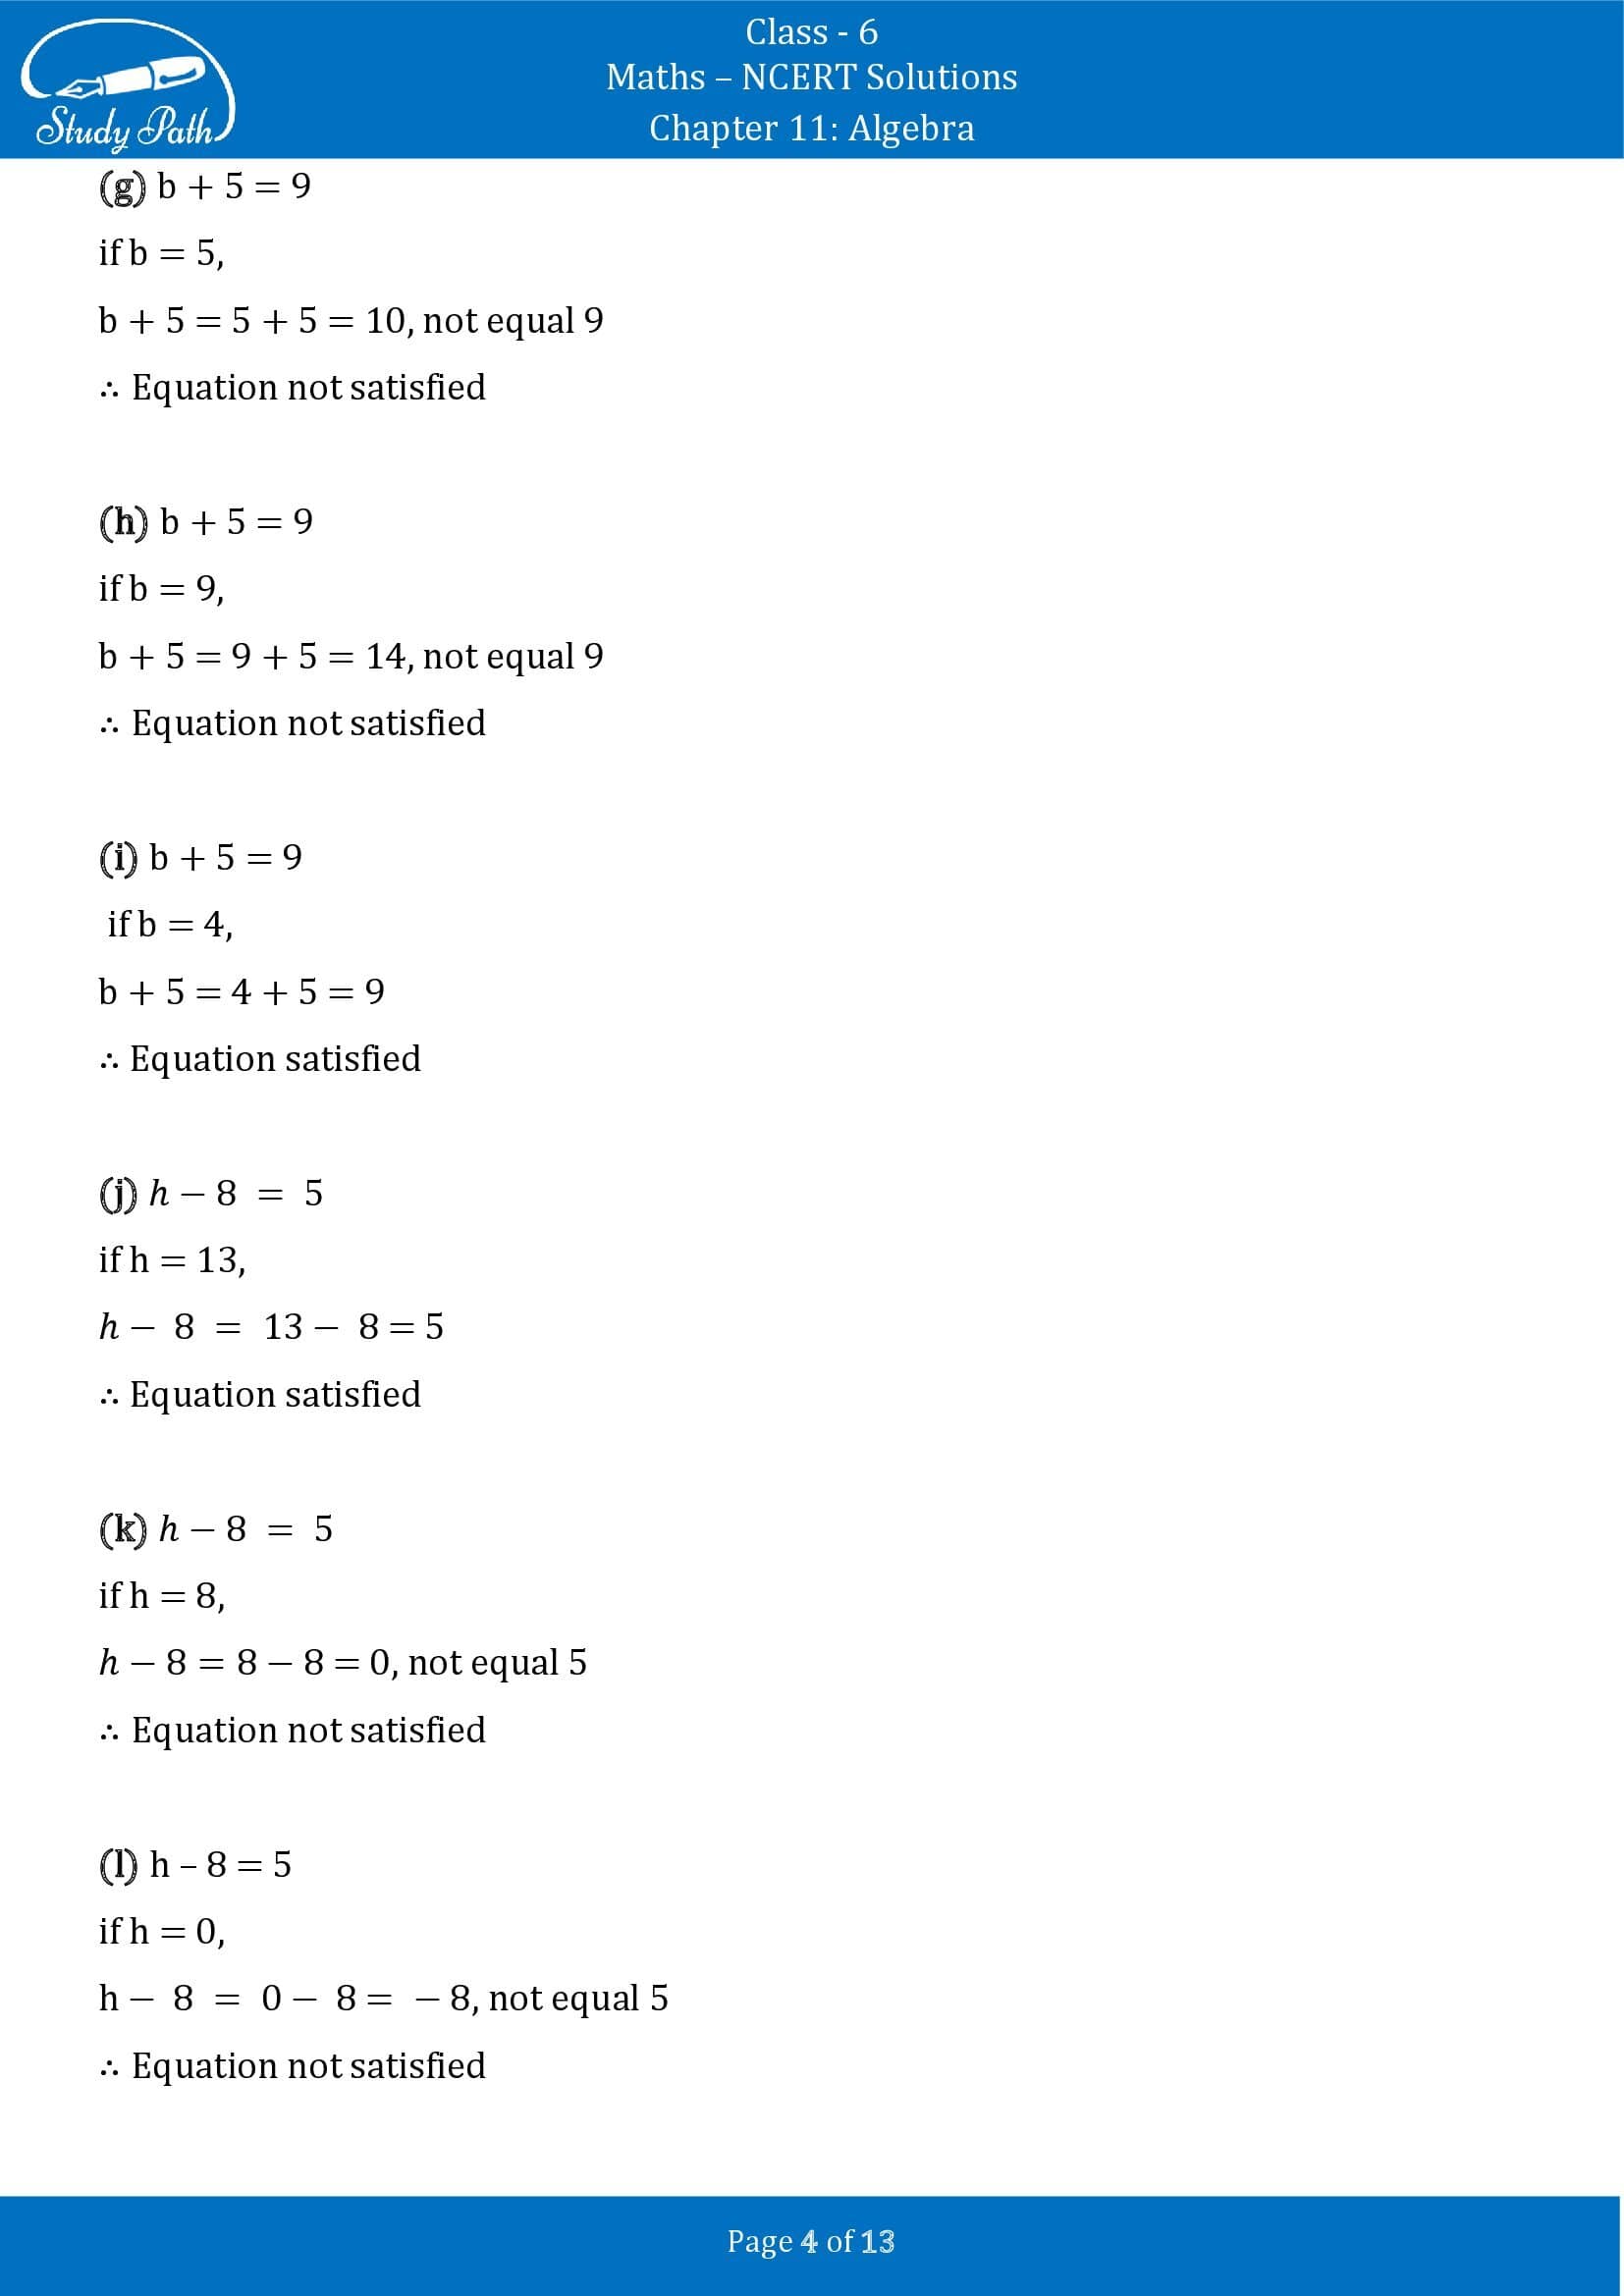 NCERT Solutions for Class 6 Maths Chapter 11 Algebra Exercise 11.5 00004